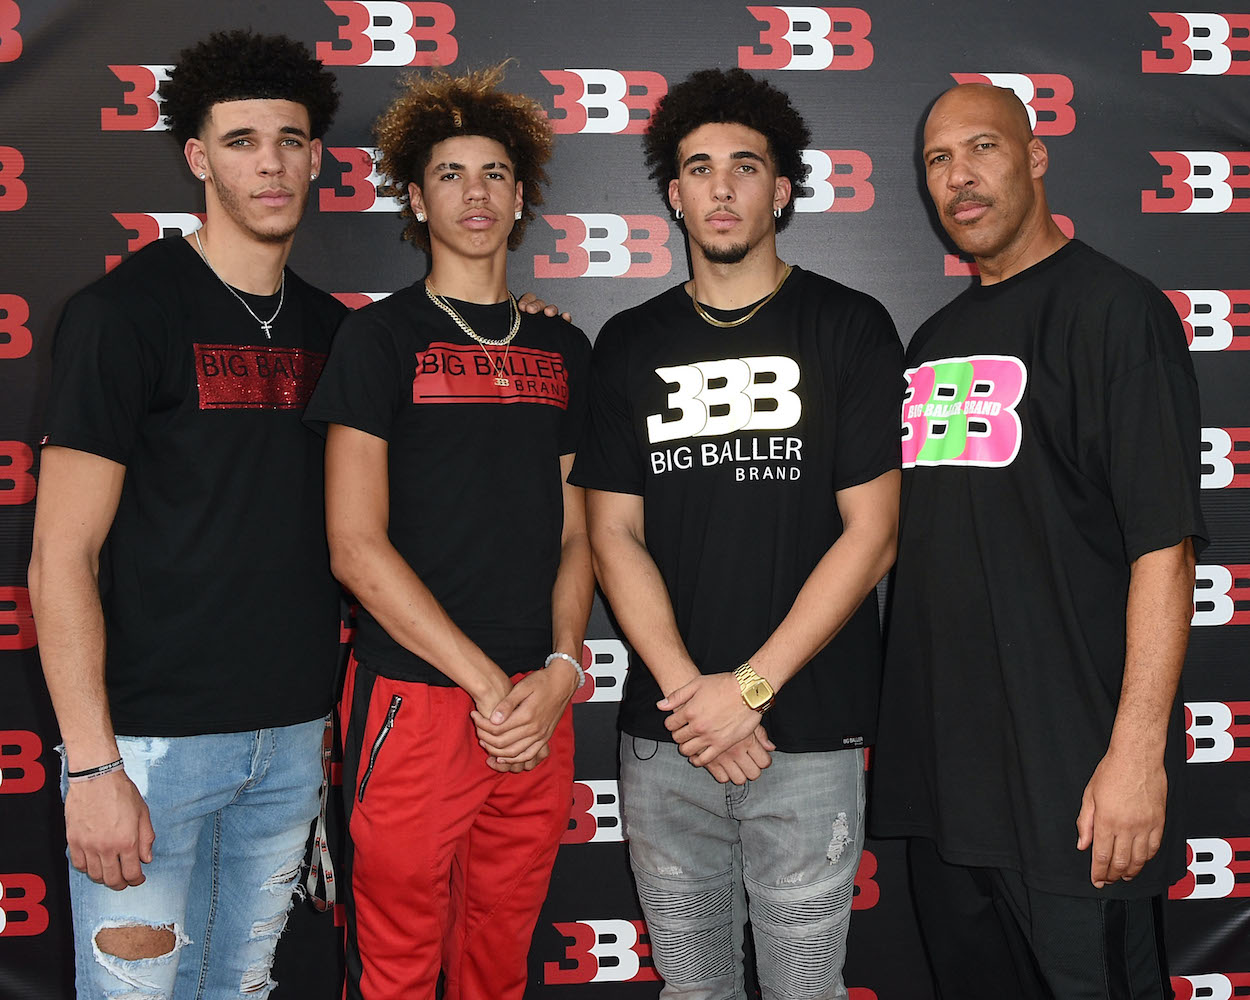 Lonzo Ball, LaMelo Ball, LiAngelo Ball and LaVar Ball attend Melo Ball's 16th Birthday on September 2, 2017 in Chino, California.